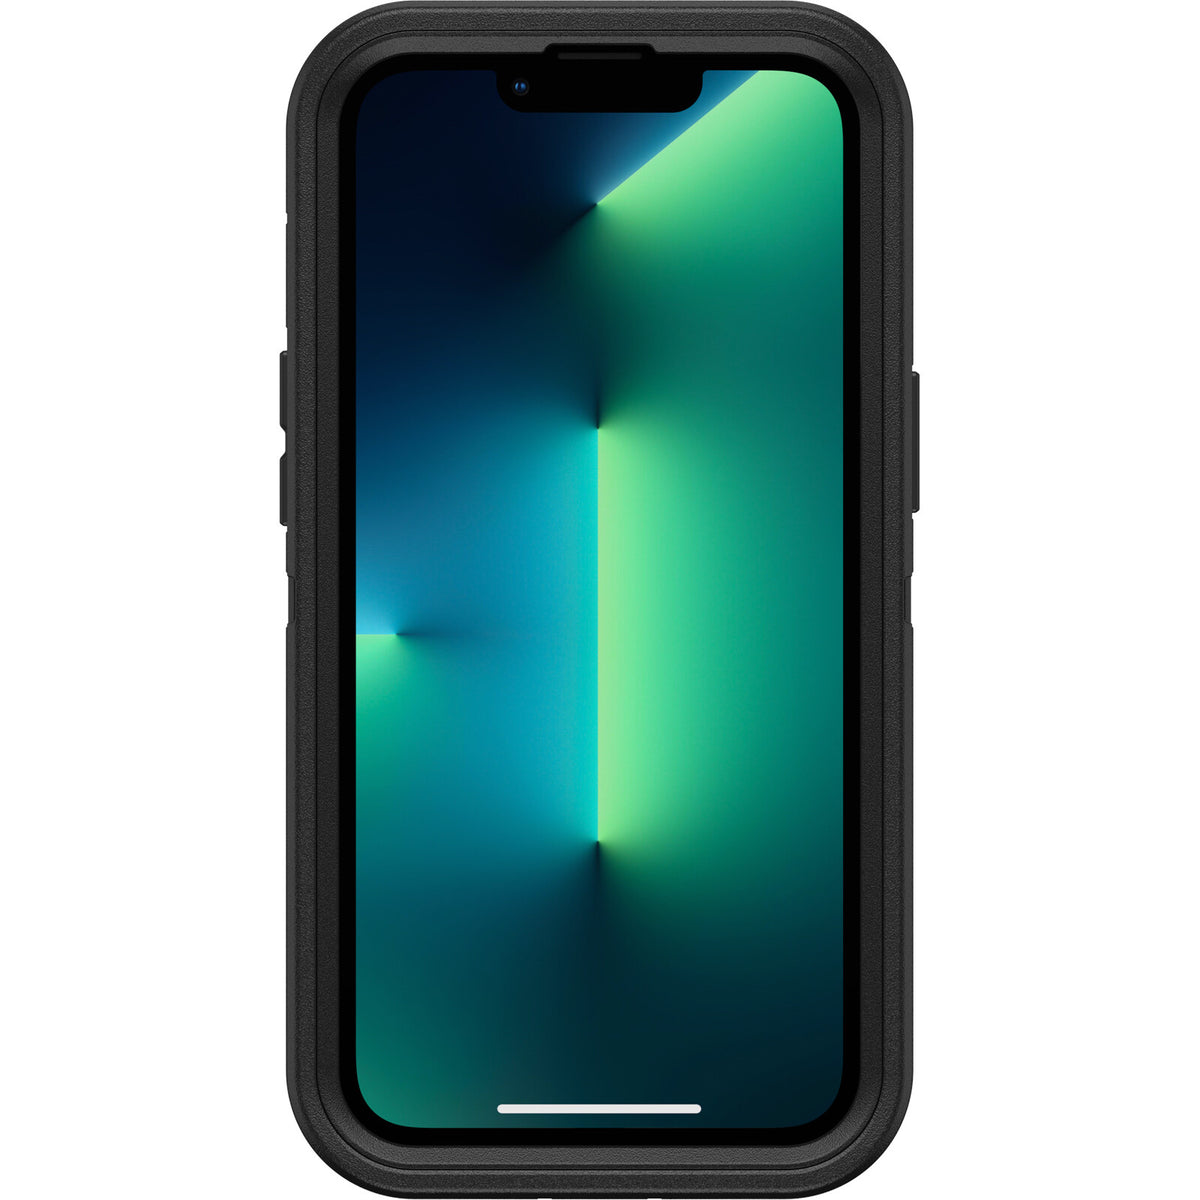 OtterBox Defender Case for iPhone 13 Pro Max, iPhone 12 Pro Max in Black